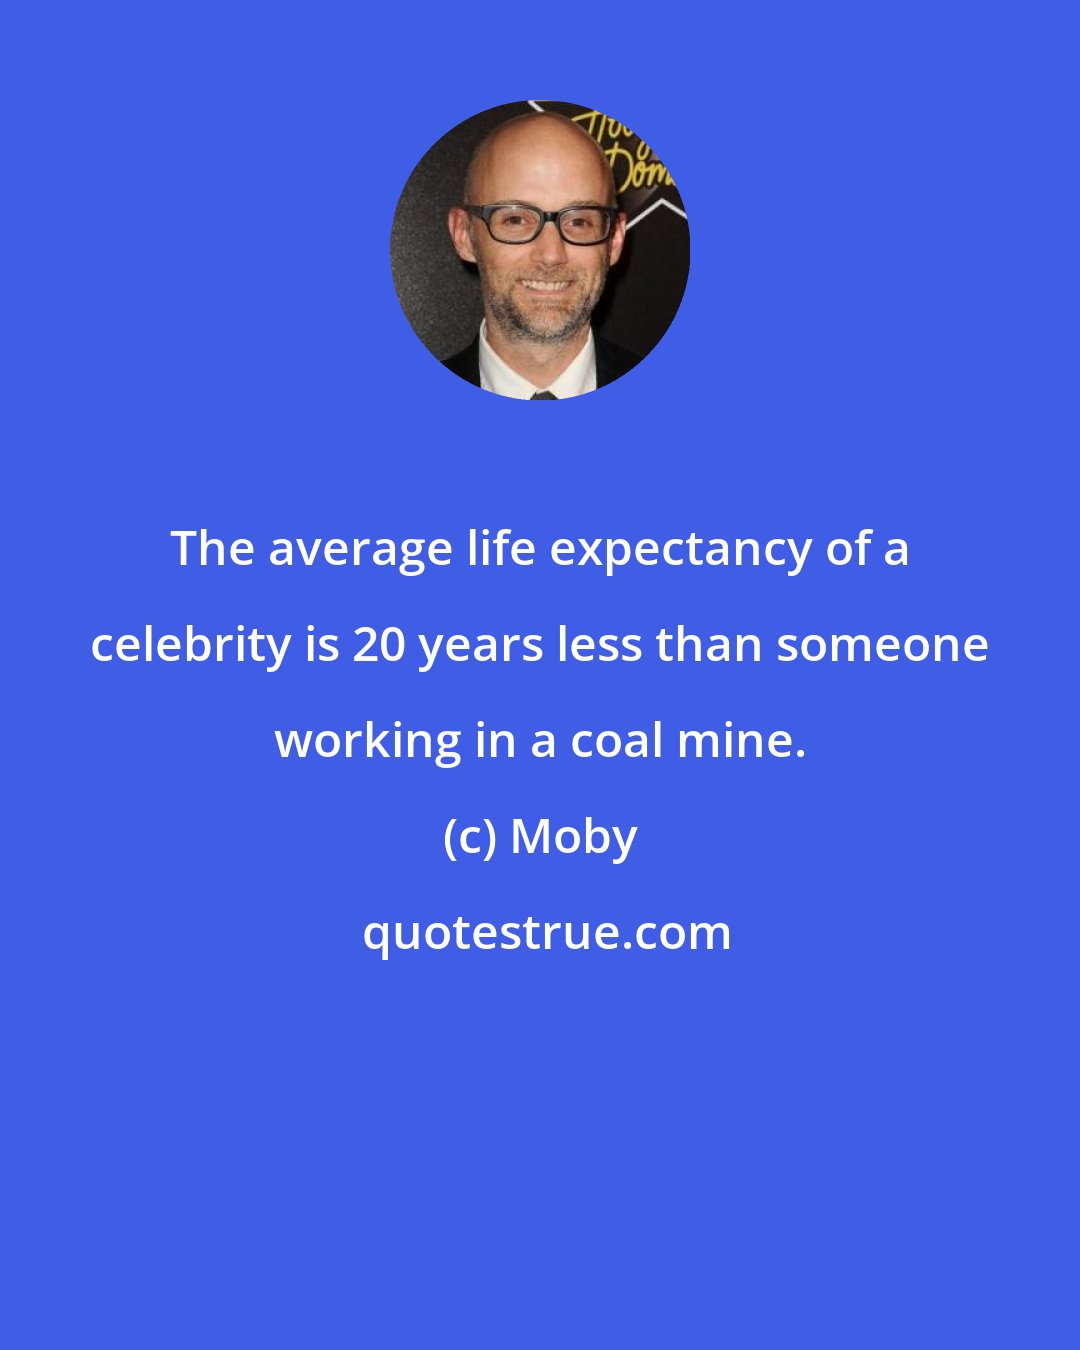 Moby: The average life expectancy of a celebrity is 20 years less than someone working in a coal mine.